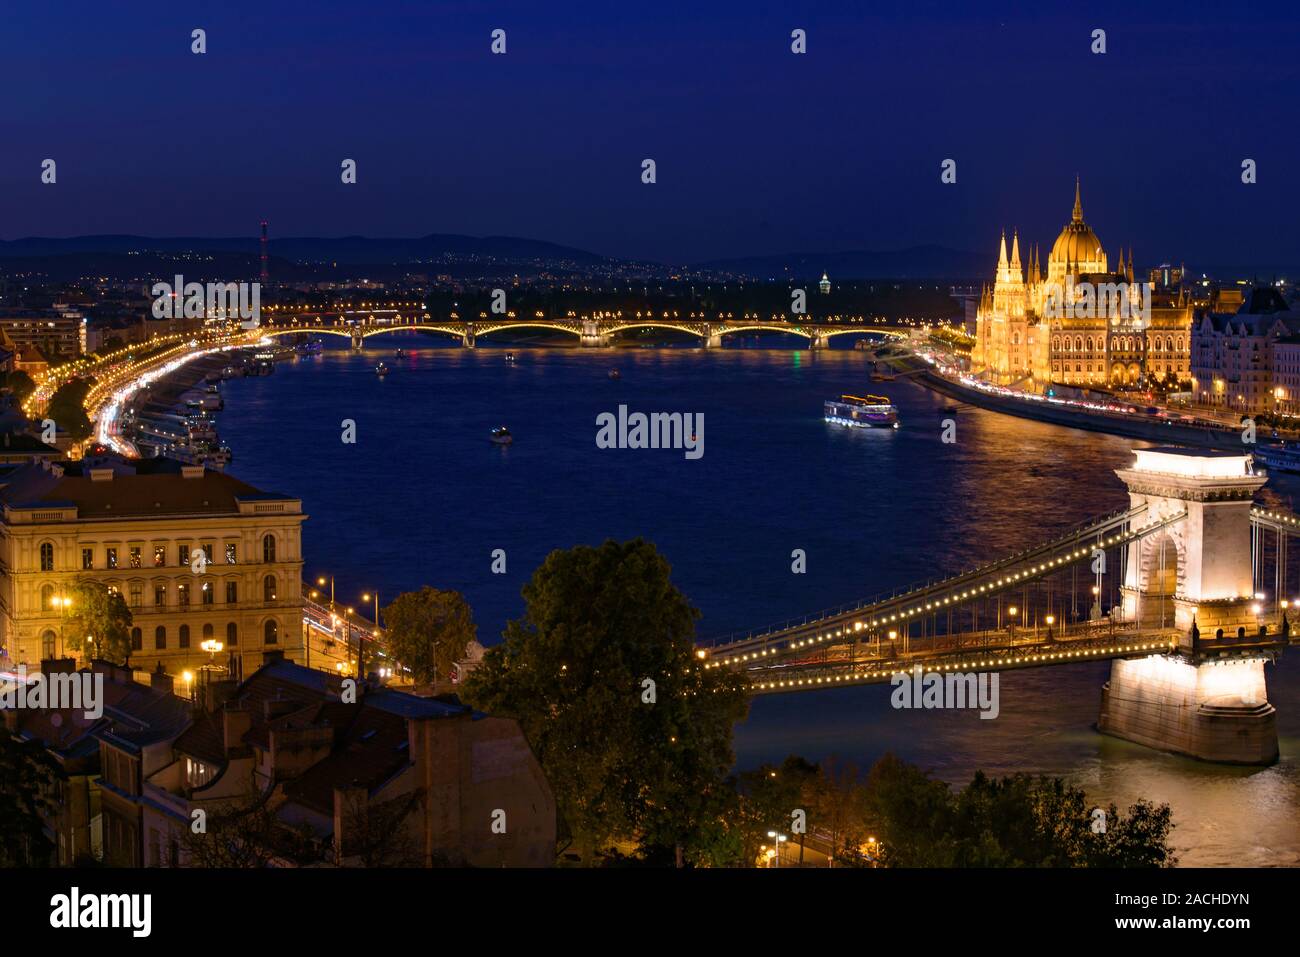 Night panorama of Hungarian Parliament Building, Széchenyi Chain Bridge, and River Danube in Budapest, Hungary Stock Photo